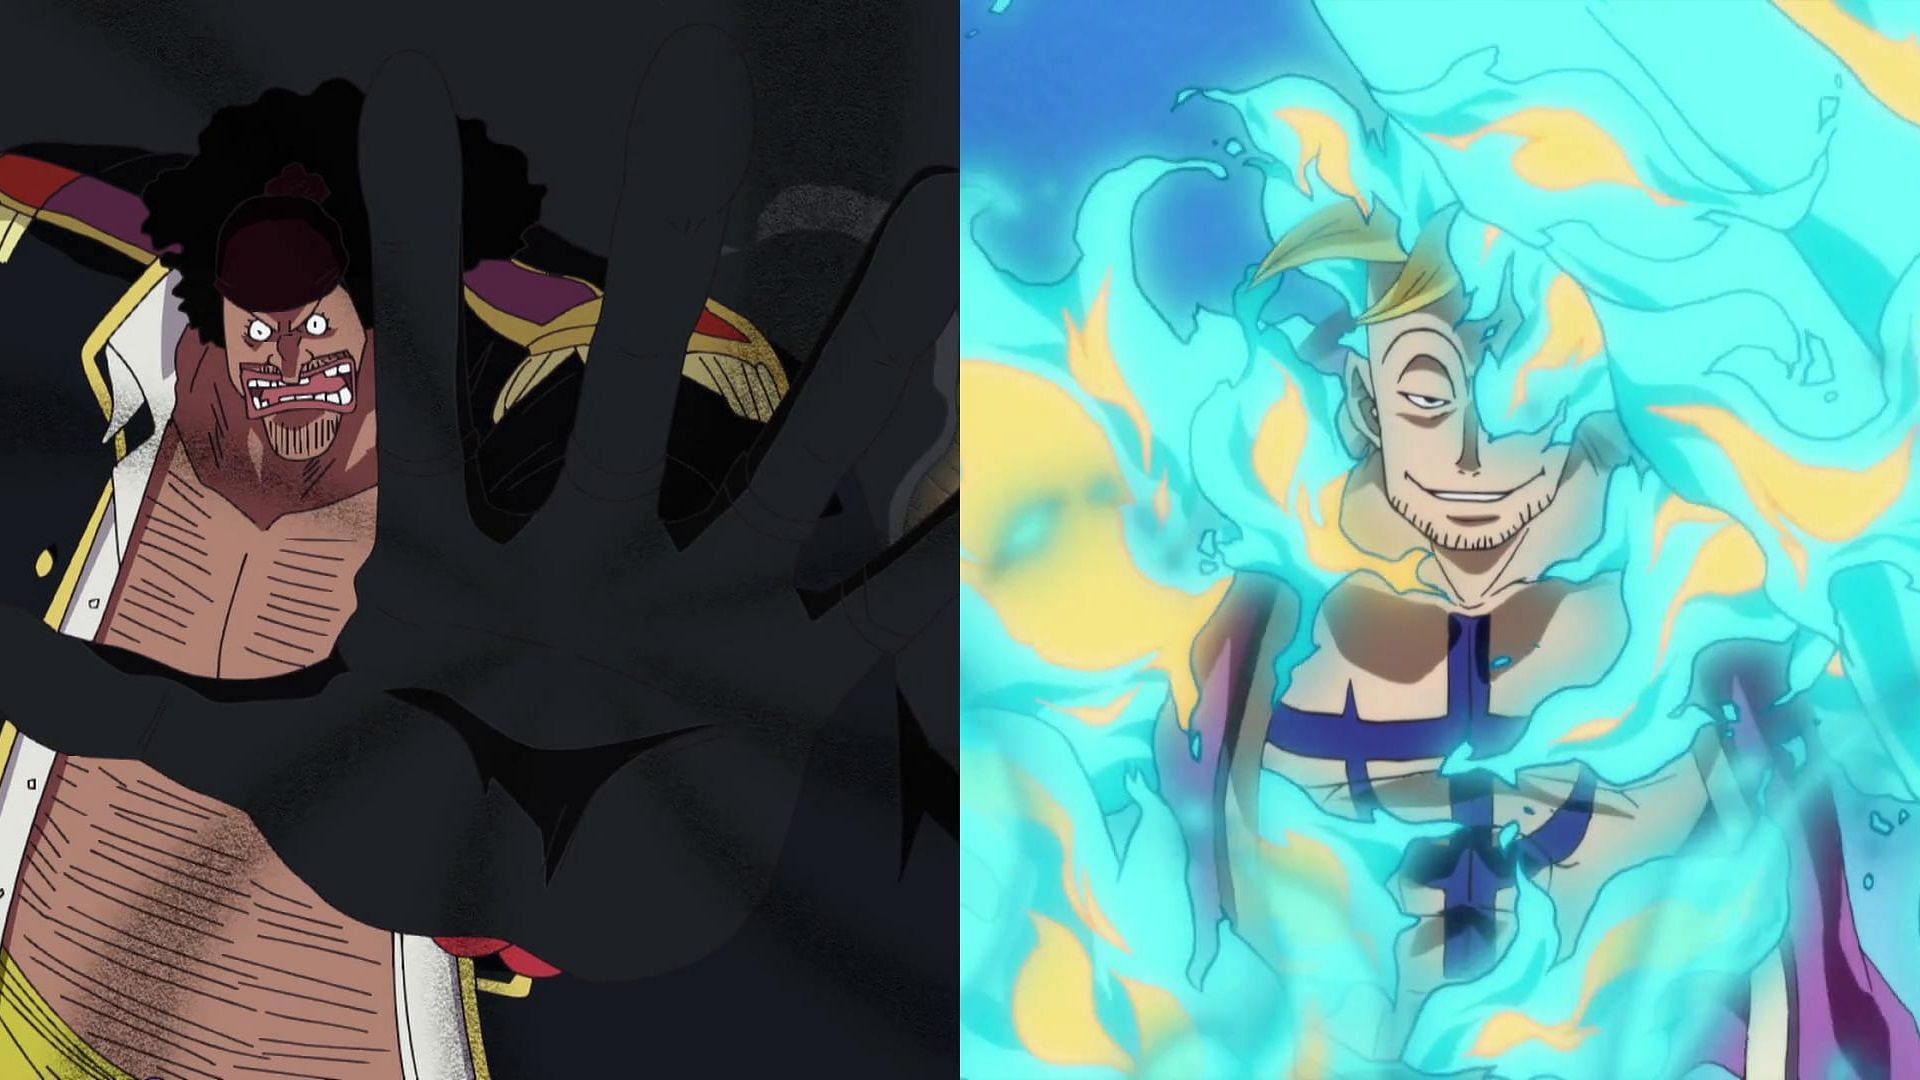 Blackbeard and Marco using their Devil Fruits as seen in One Piece (Image via Toei Animation, One Piece)